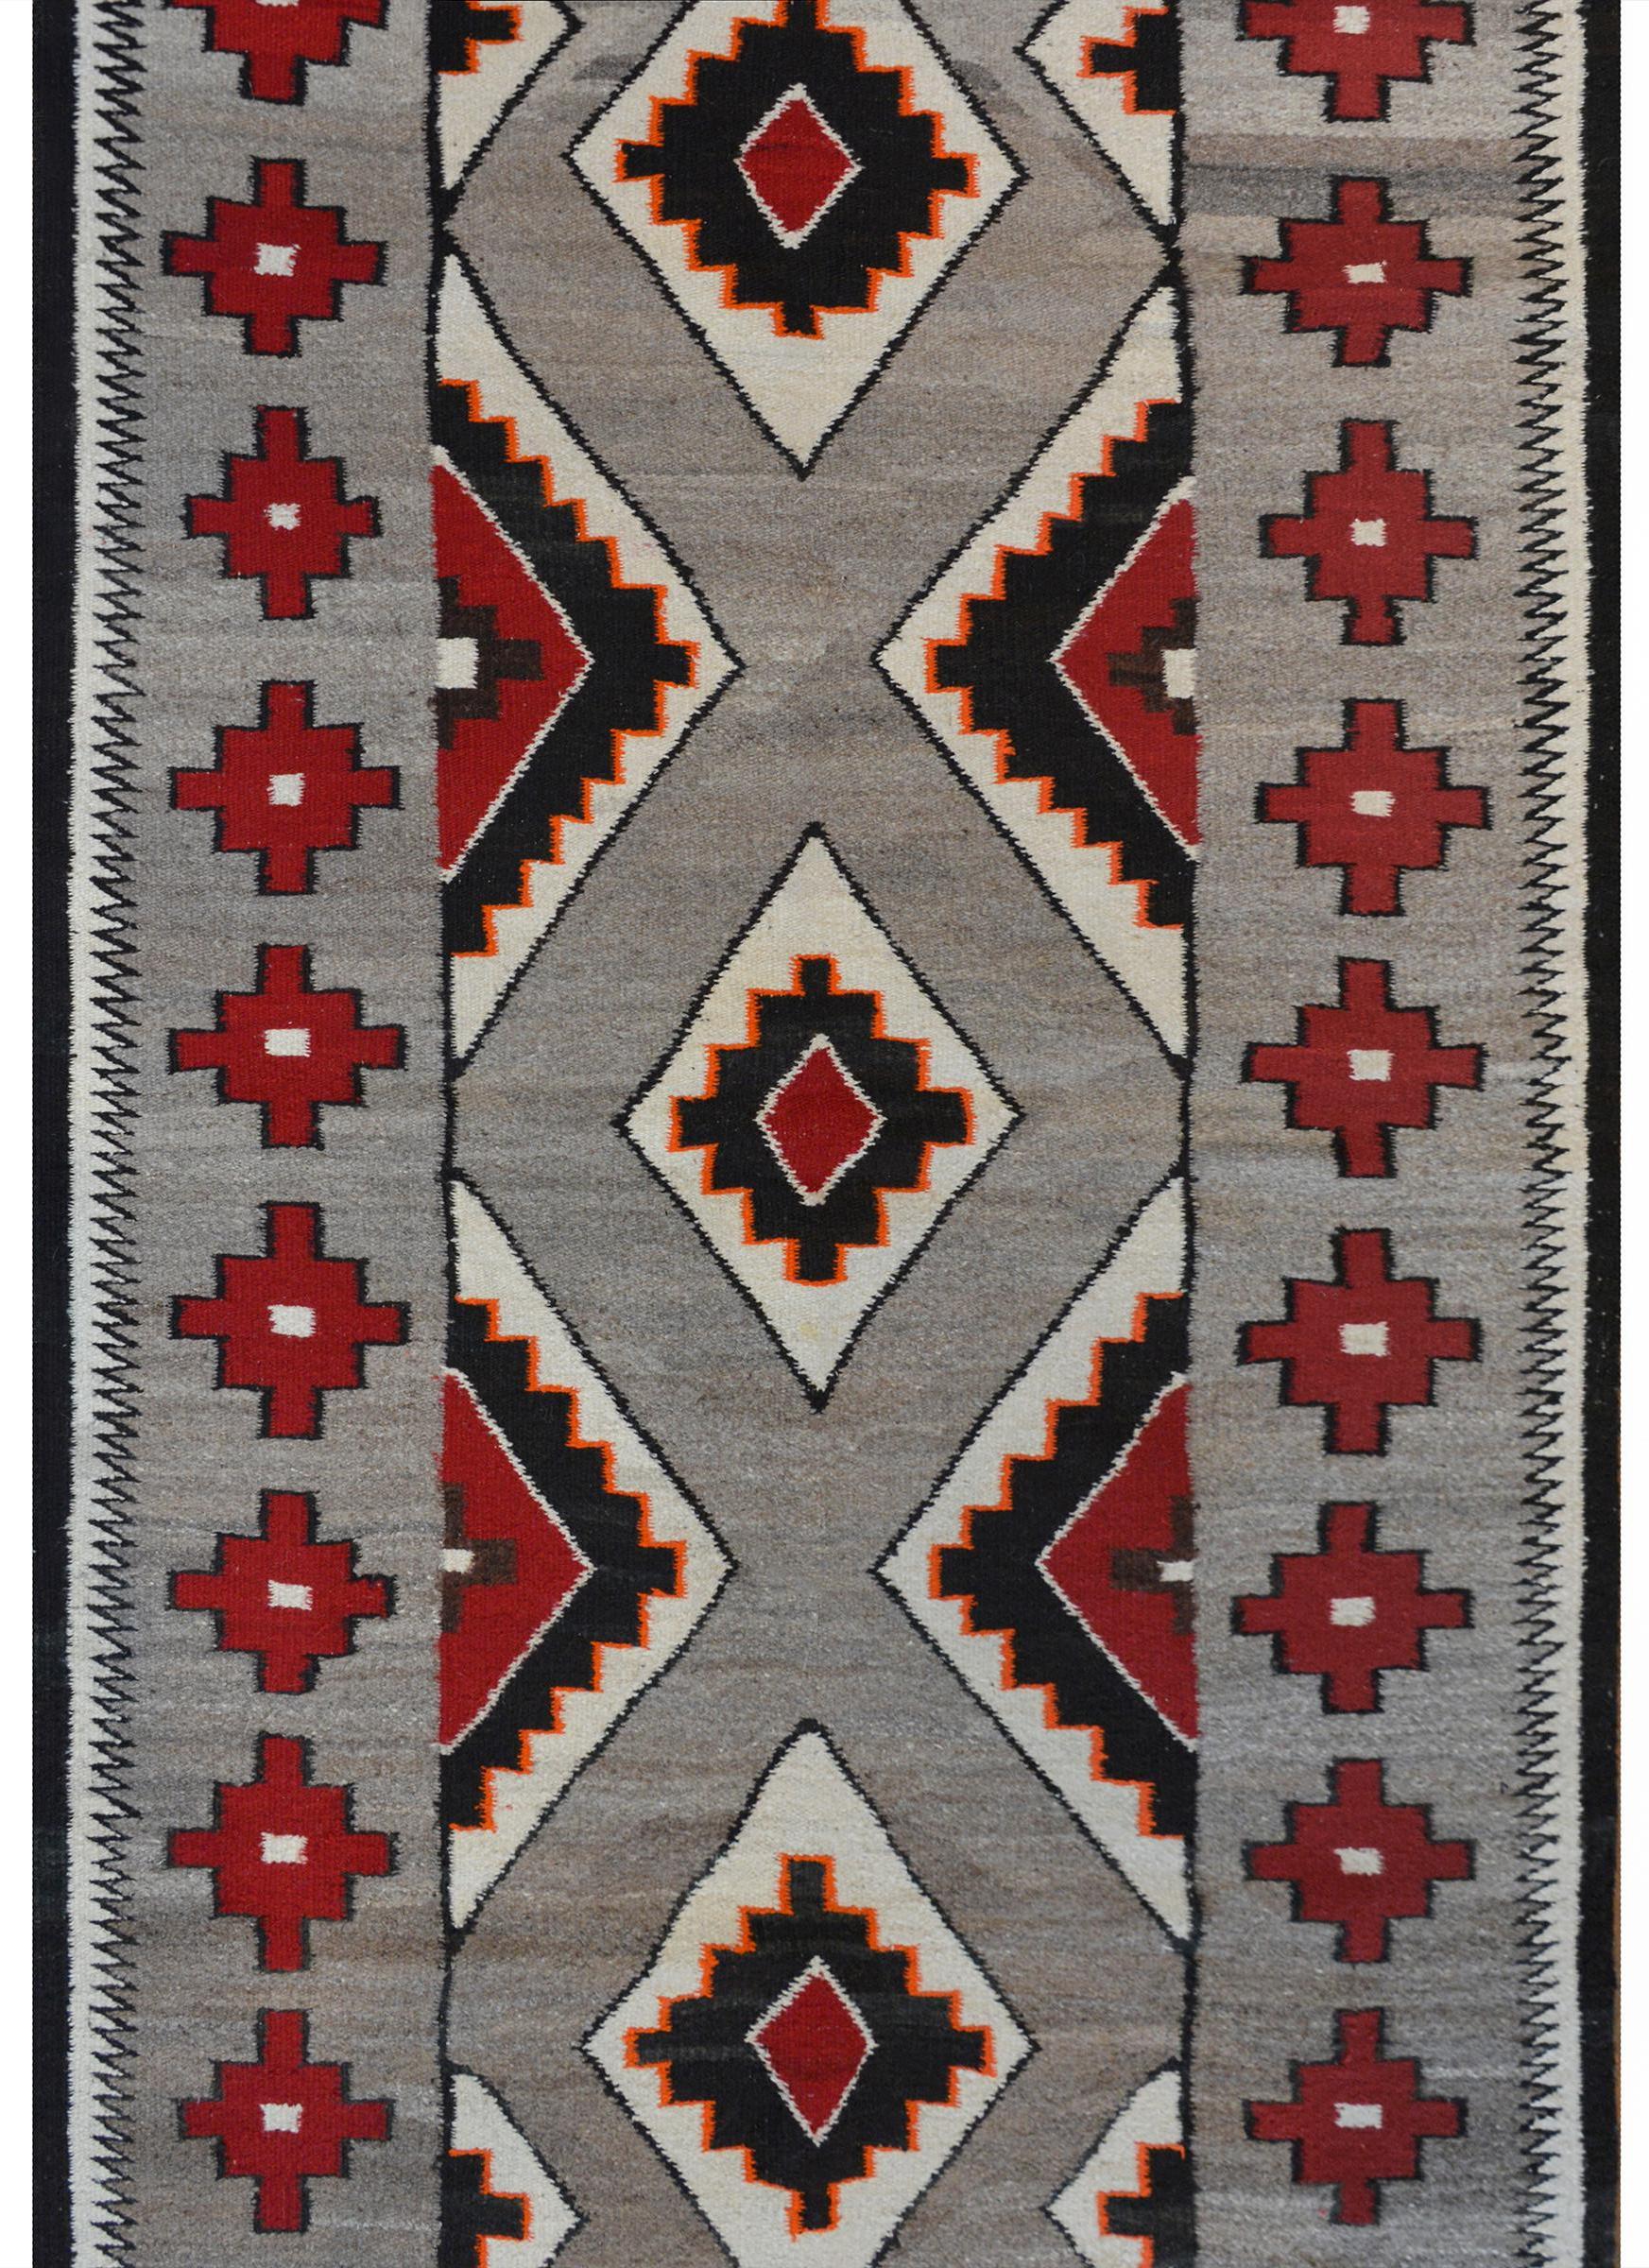 A beautiful early 20th century Navajo rug with a wonderful pattern containing multiple diamonds across the field, woven in cream, crimson, black, and orange colored wool on a gray background surrounded by a simple border of crimson diamonds.